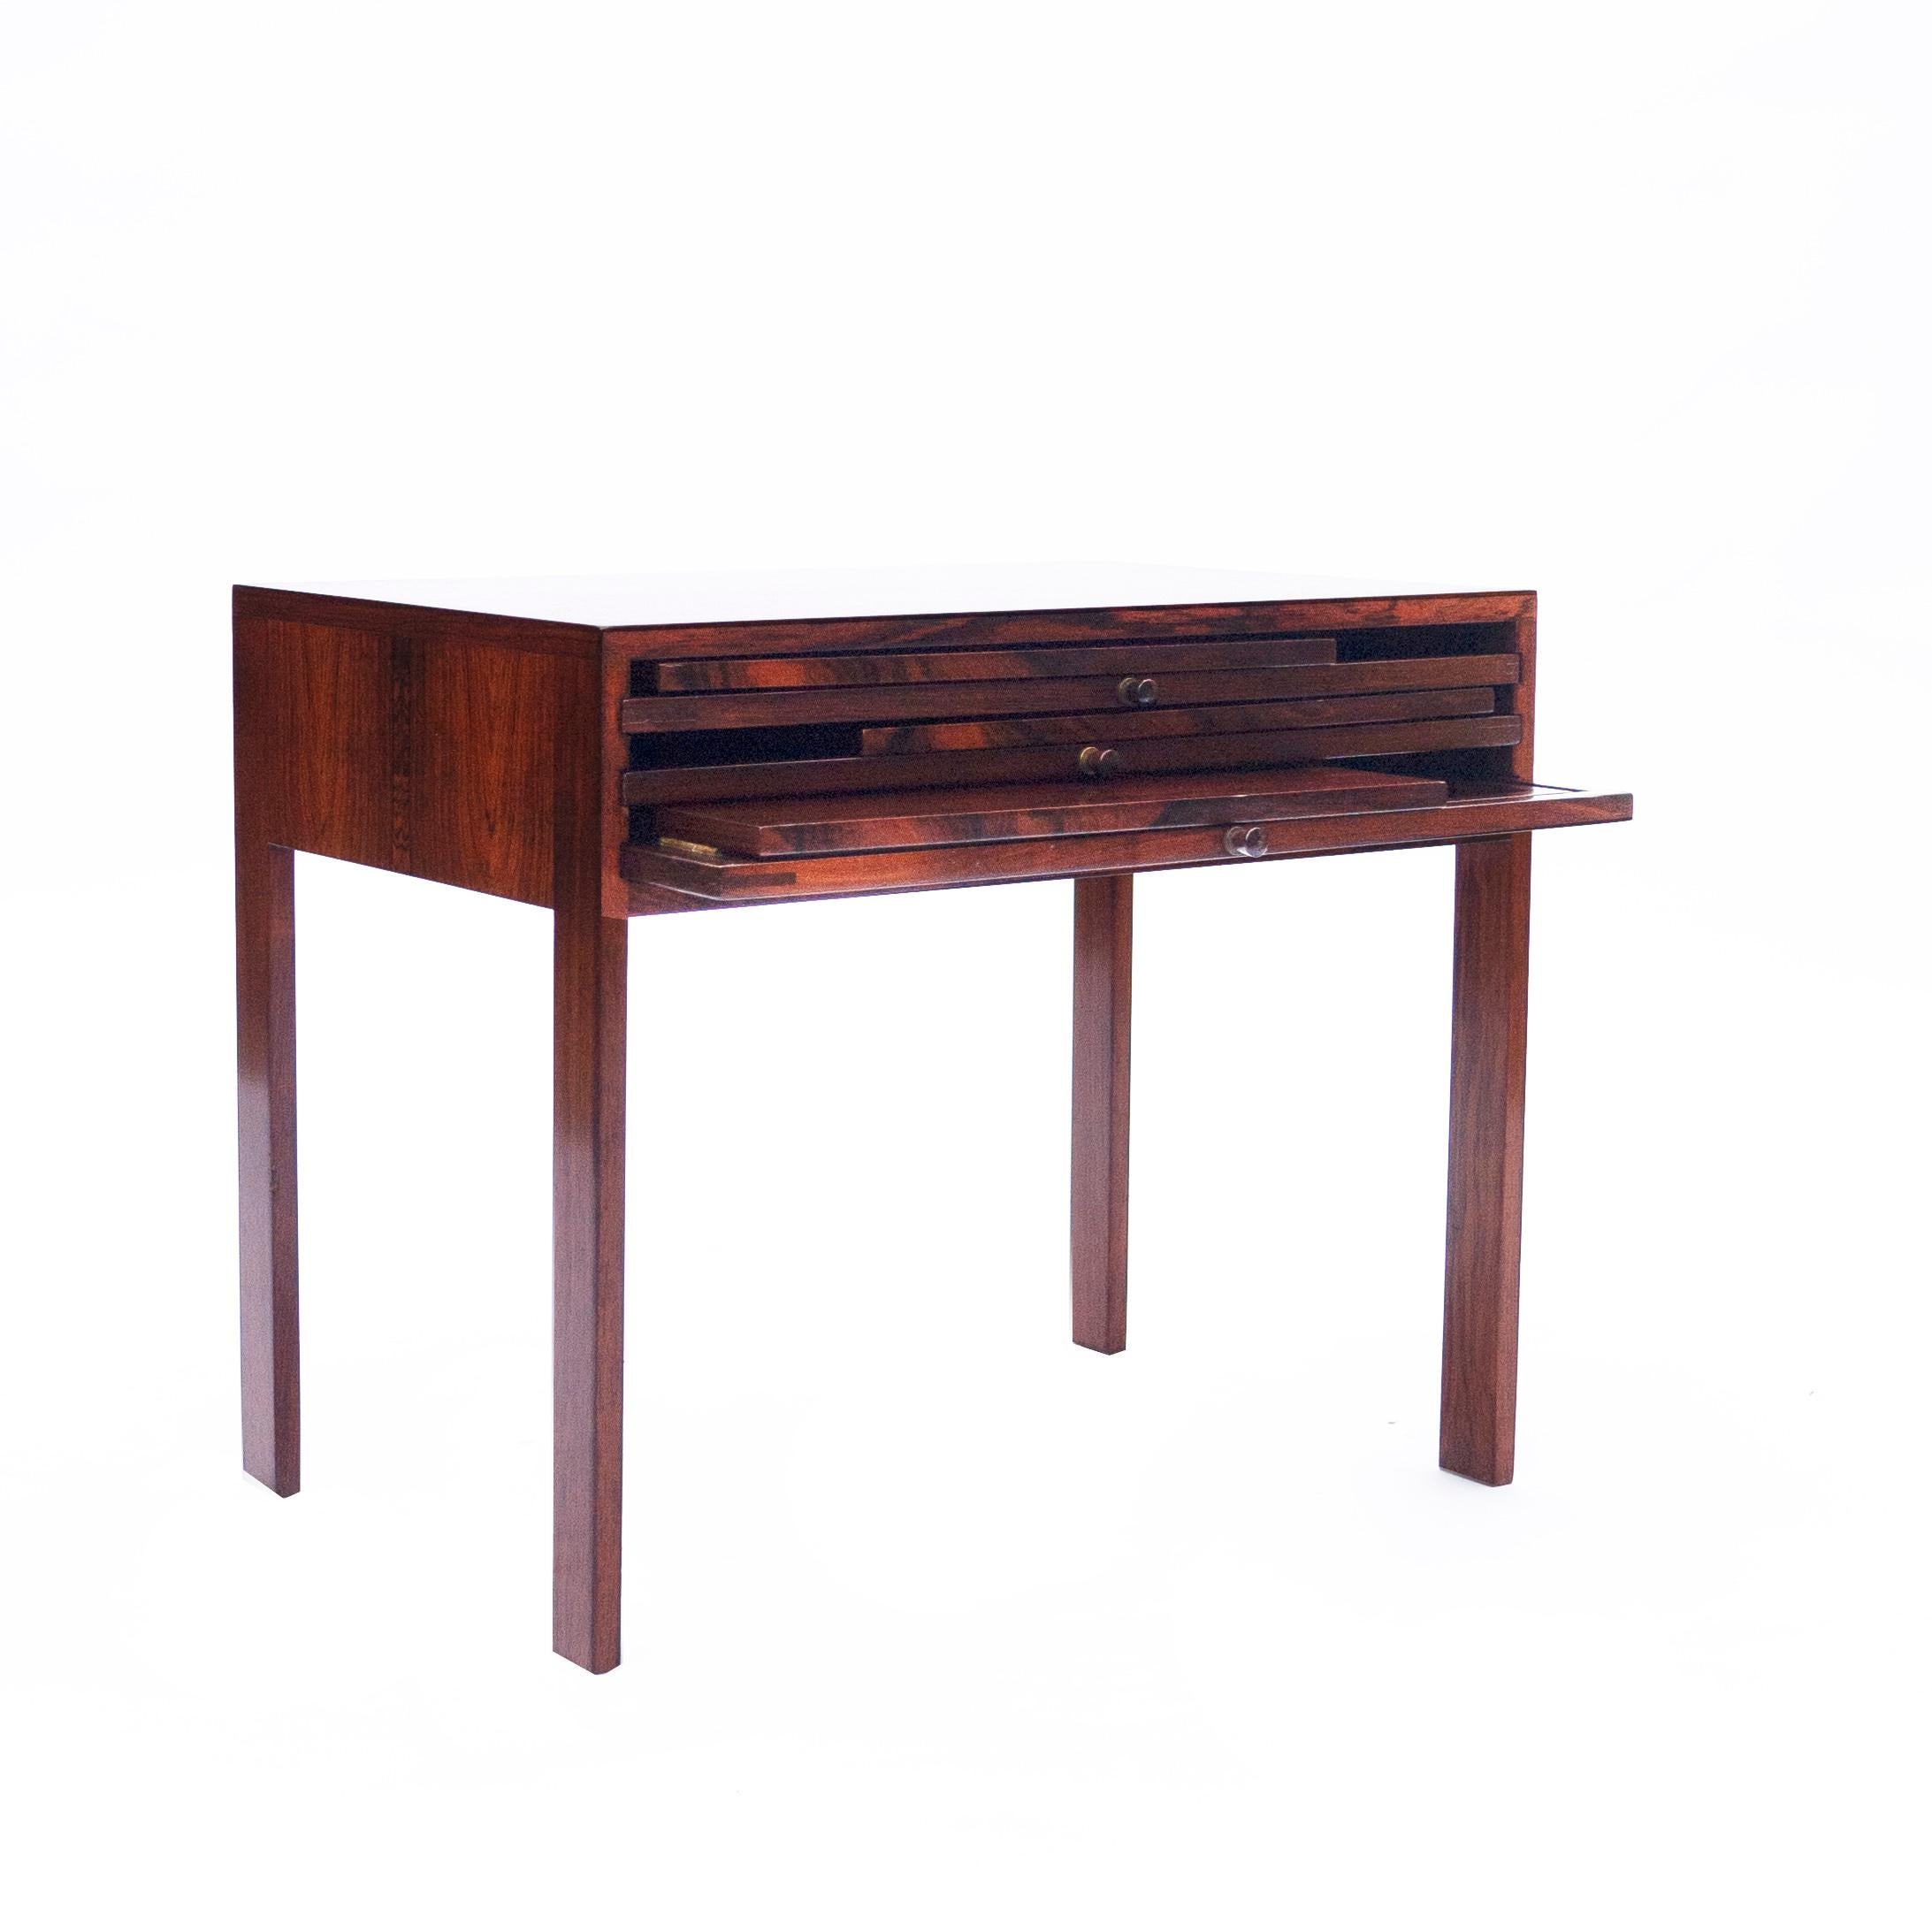 A rosewood side table designed by Illum Wikkelsø with three fold out tables.

Manufacturer - Illum Wikkelsø.

Design Period - 1960 to 1969.

Country of Manufacture - Denmark

Attribution Marks - n/a

Detailed Condition - Good with minimal